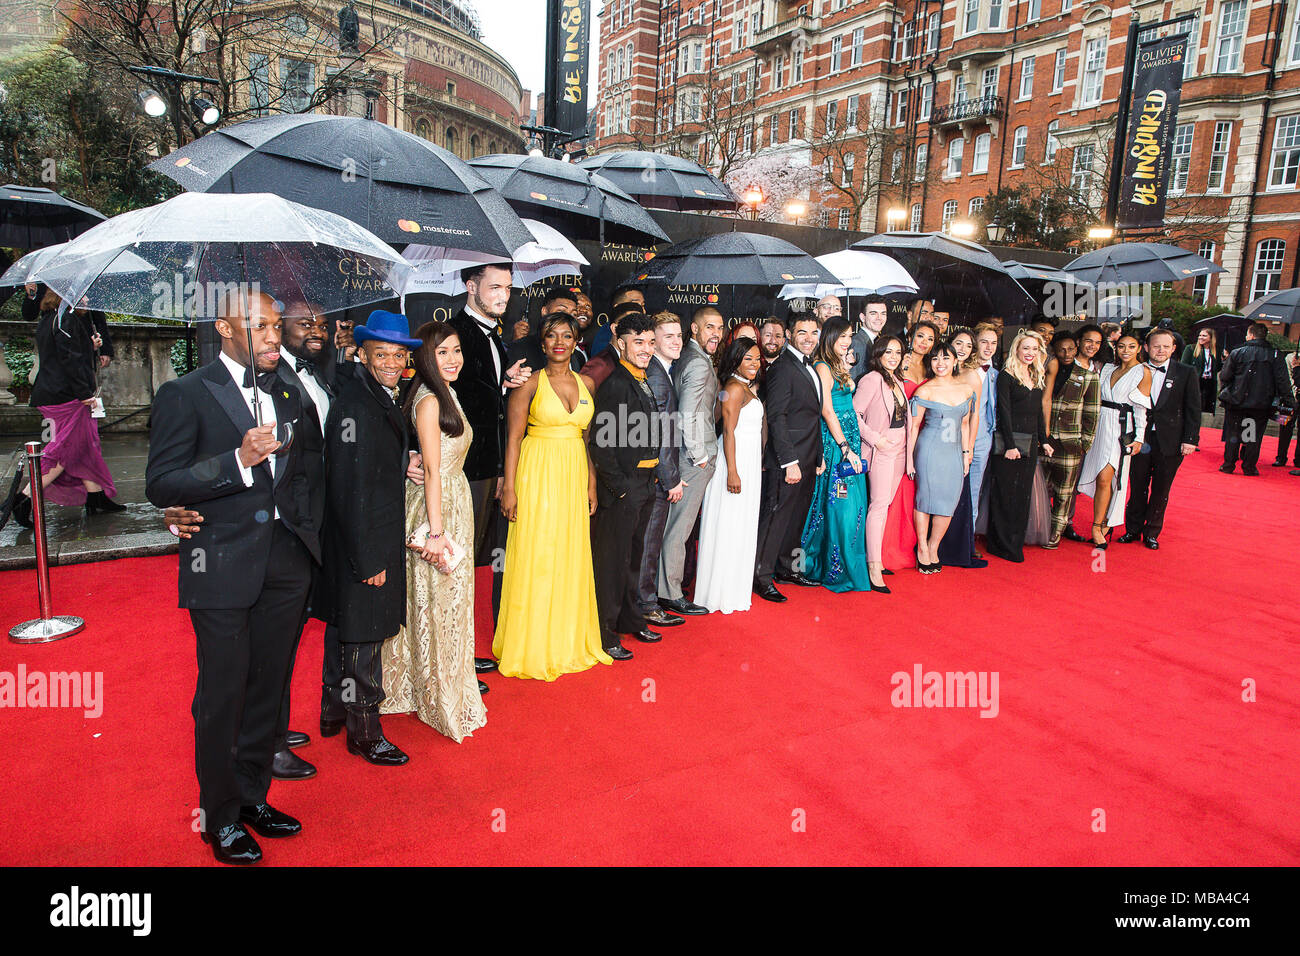 London, UK. 8th April, 2018. The cast of smash hit musical Hamilton pose in the rain on the red carpet at the 2018 Olivier Awards held at the Royal Albert Hall. Hamilton went on the win a record seven Oliviers including Best New Musical. Credit: David Betteridge/Alamy Live News Stock Photo